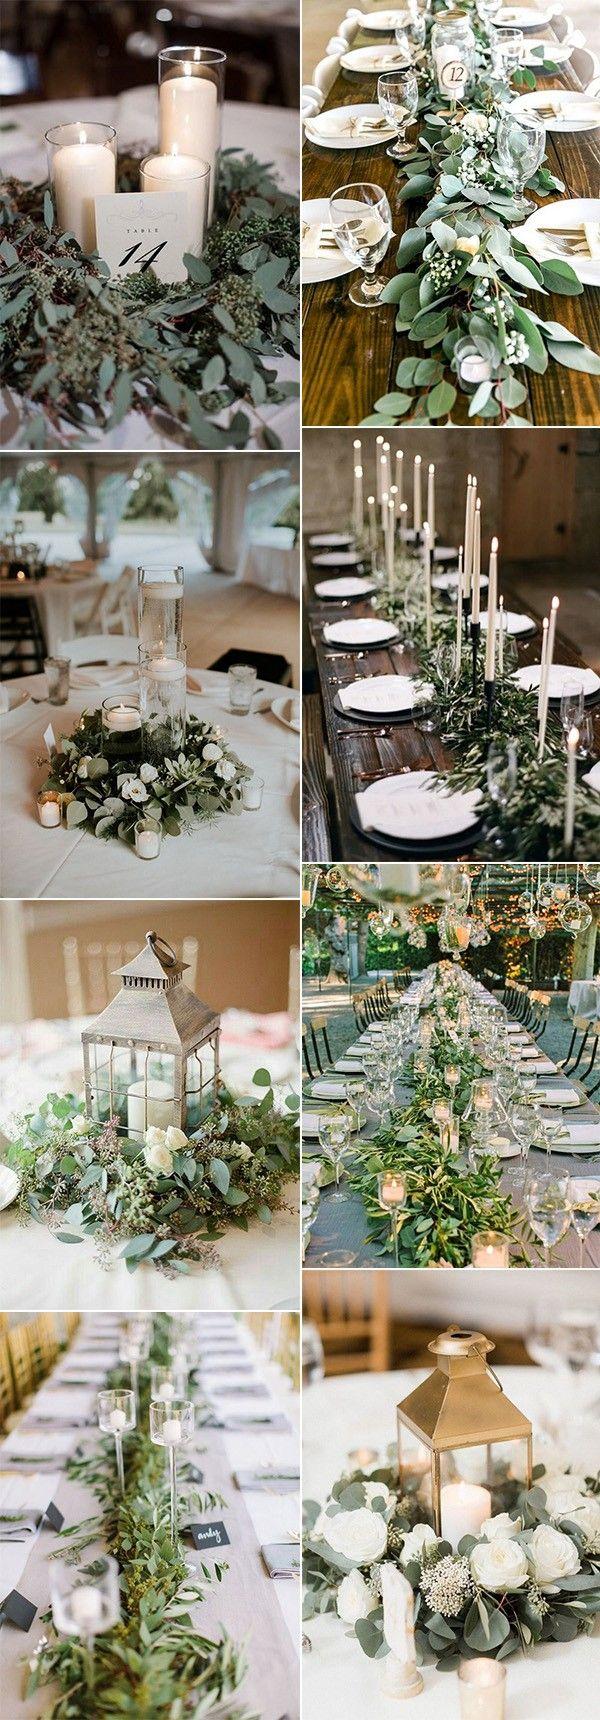 Wedding - Top 15 White And Greenery Wedding Centerpieces For 2018